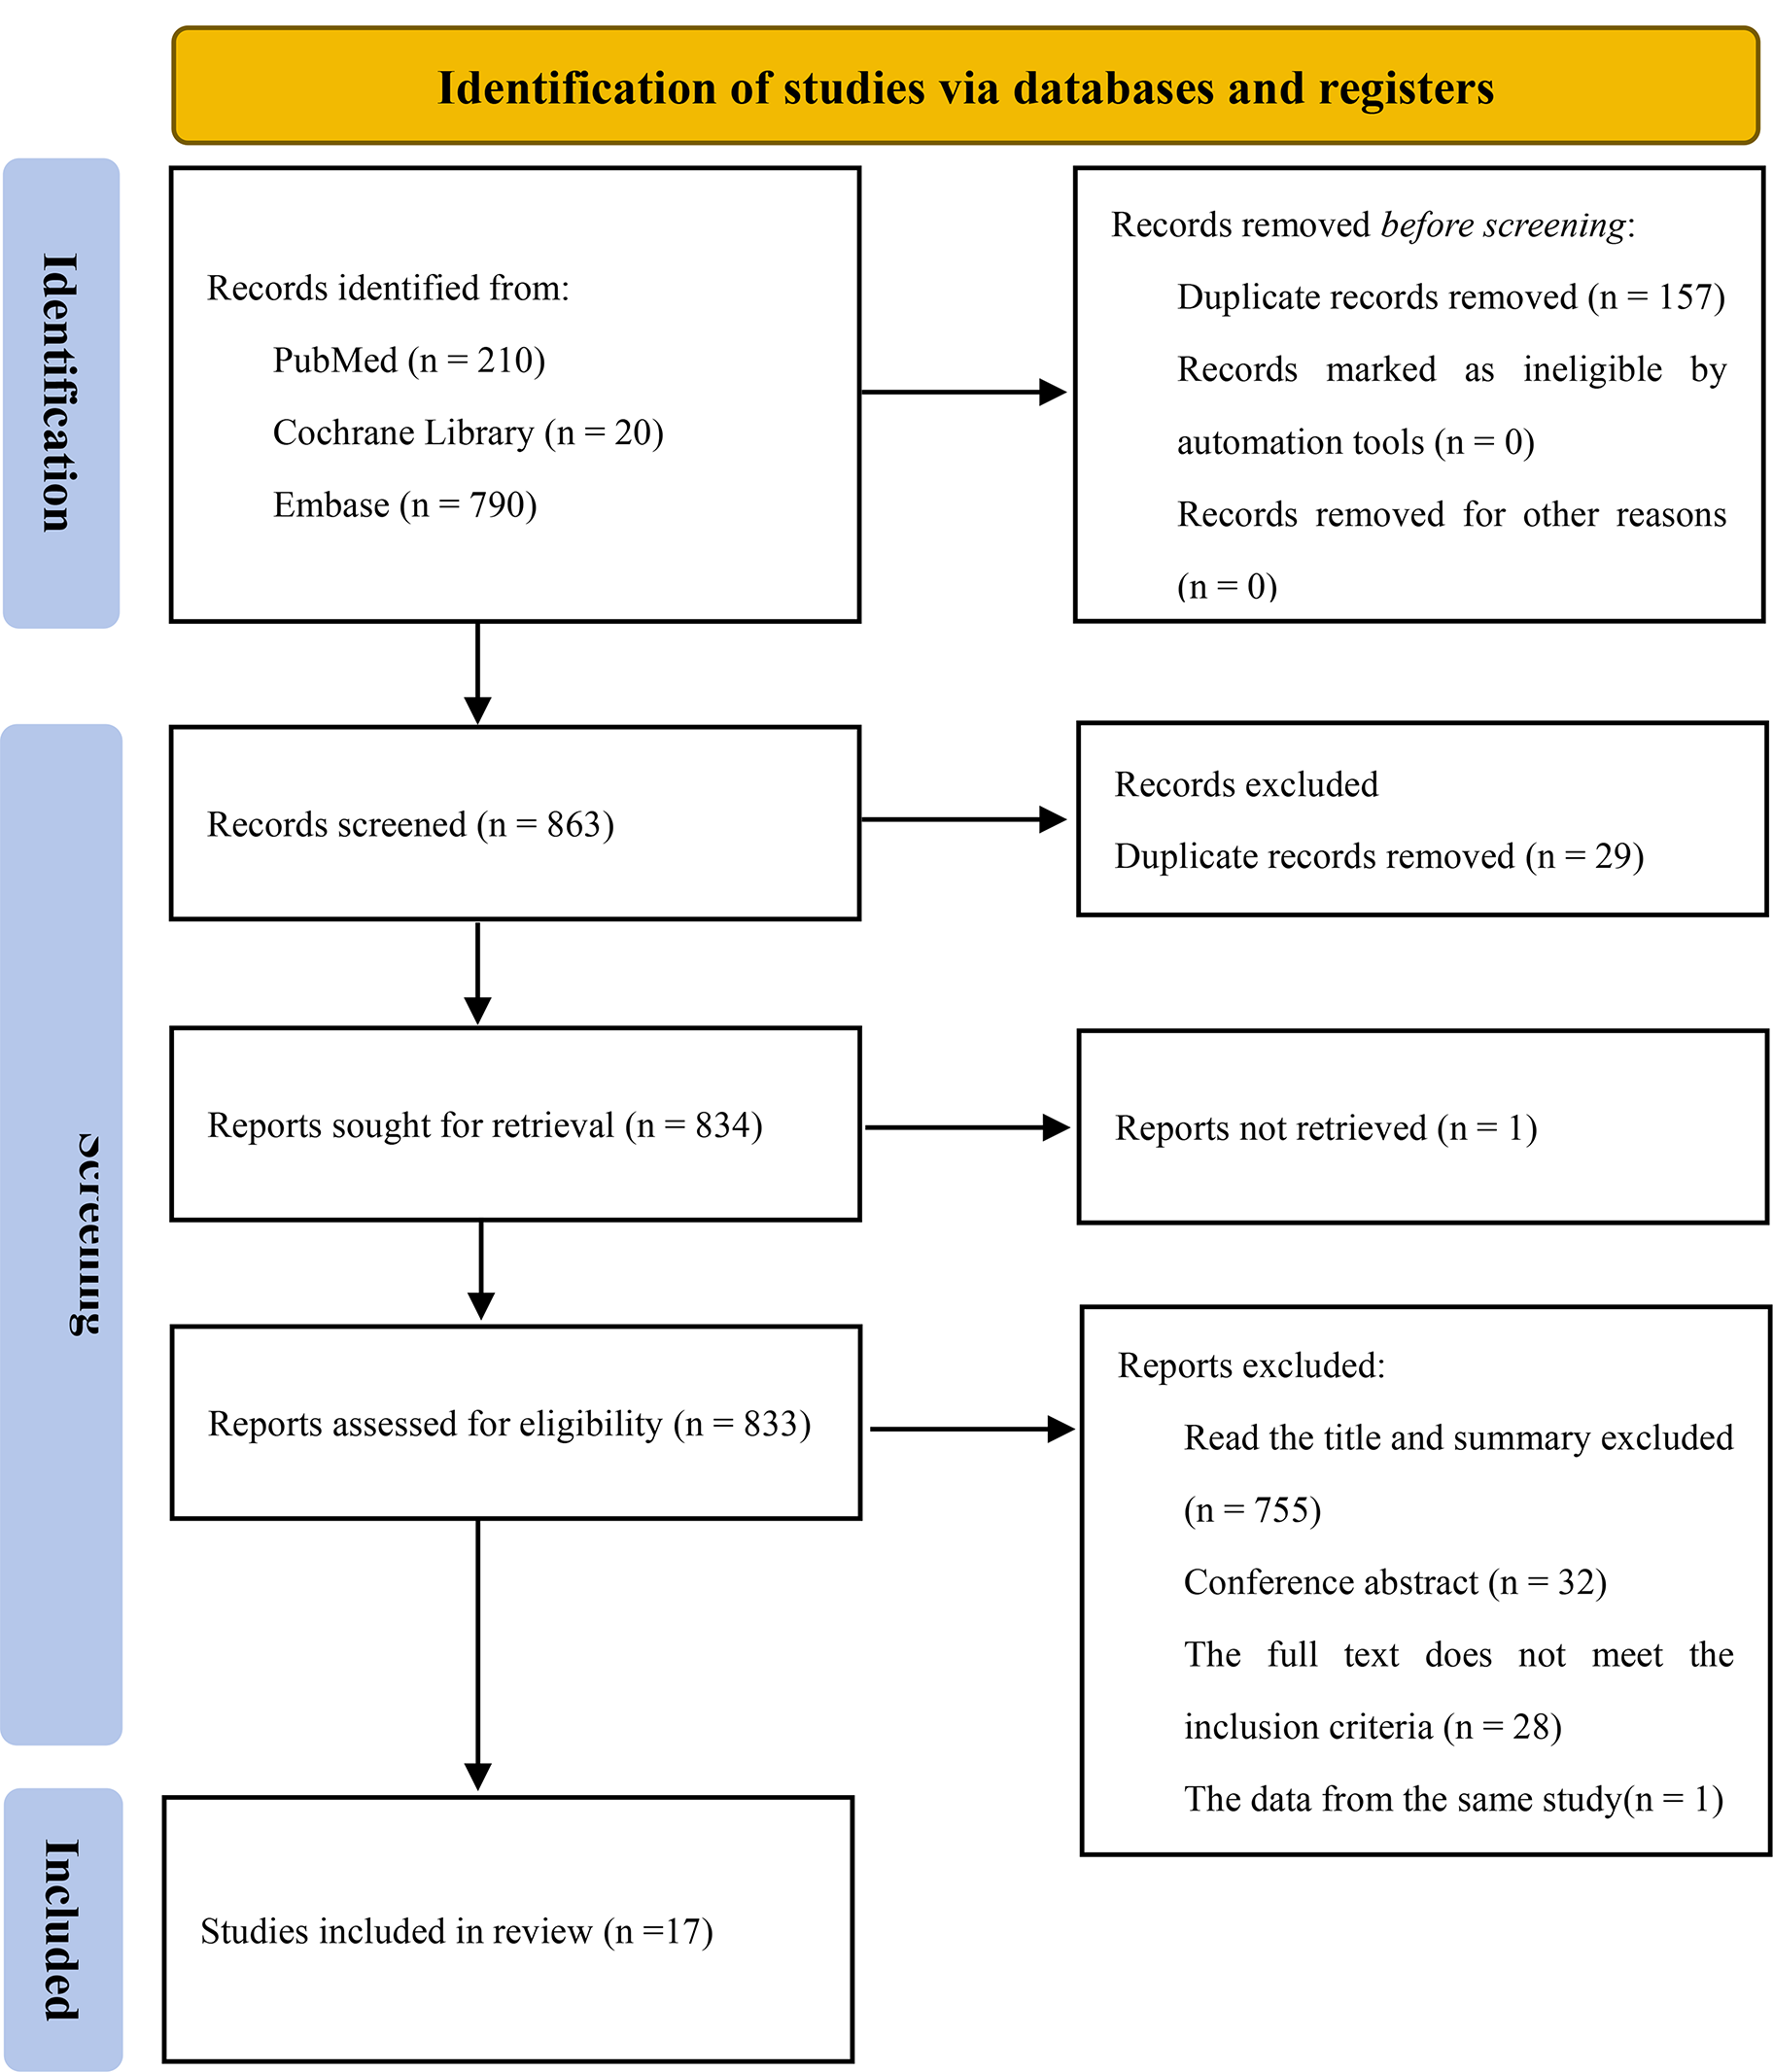 Vaccination and the risk of systemic lupus erythematosus: a meta-analysis of observational studies